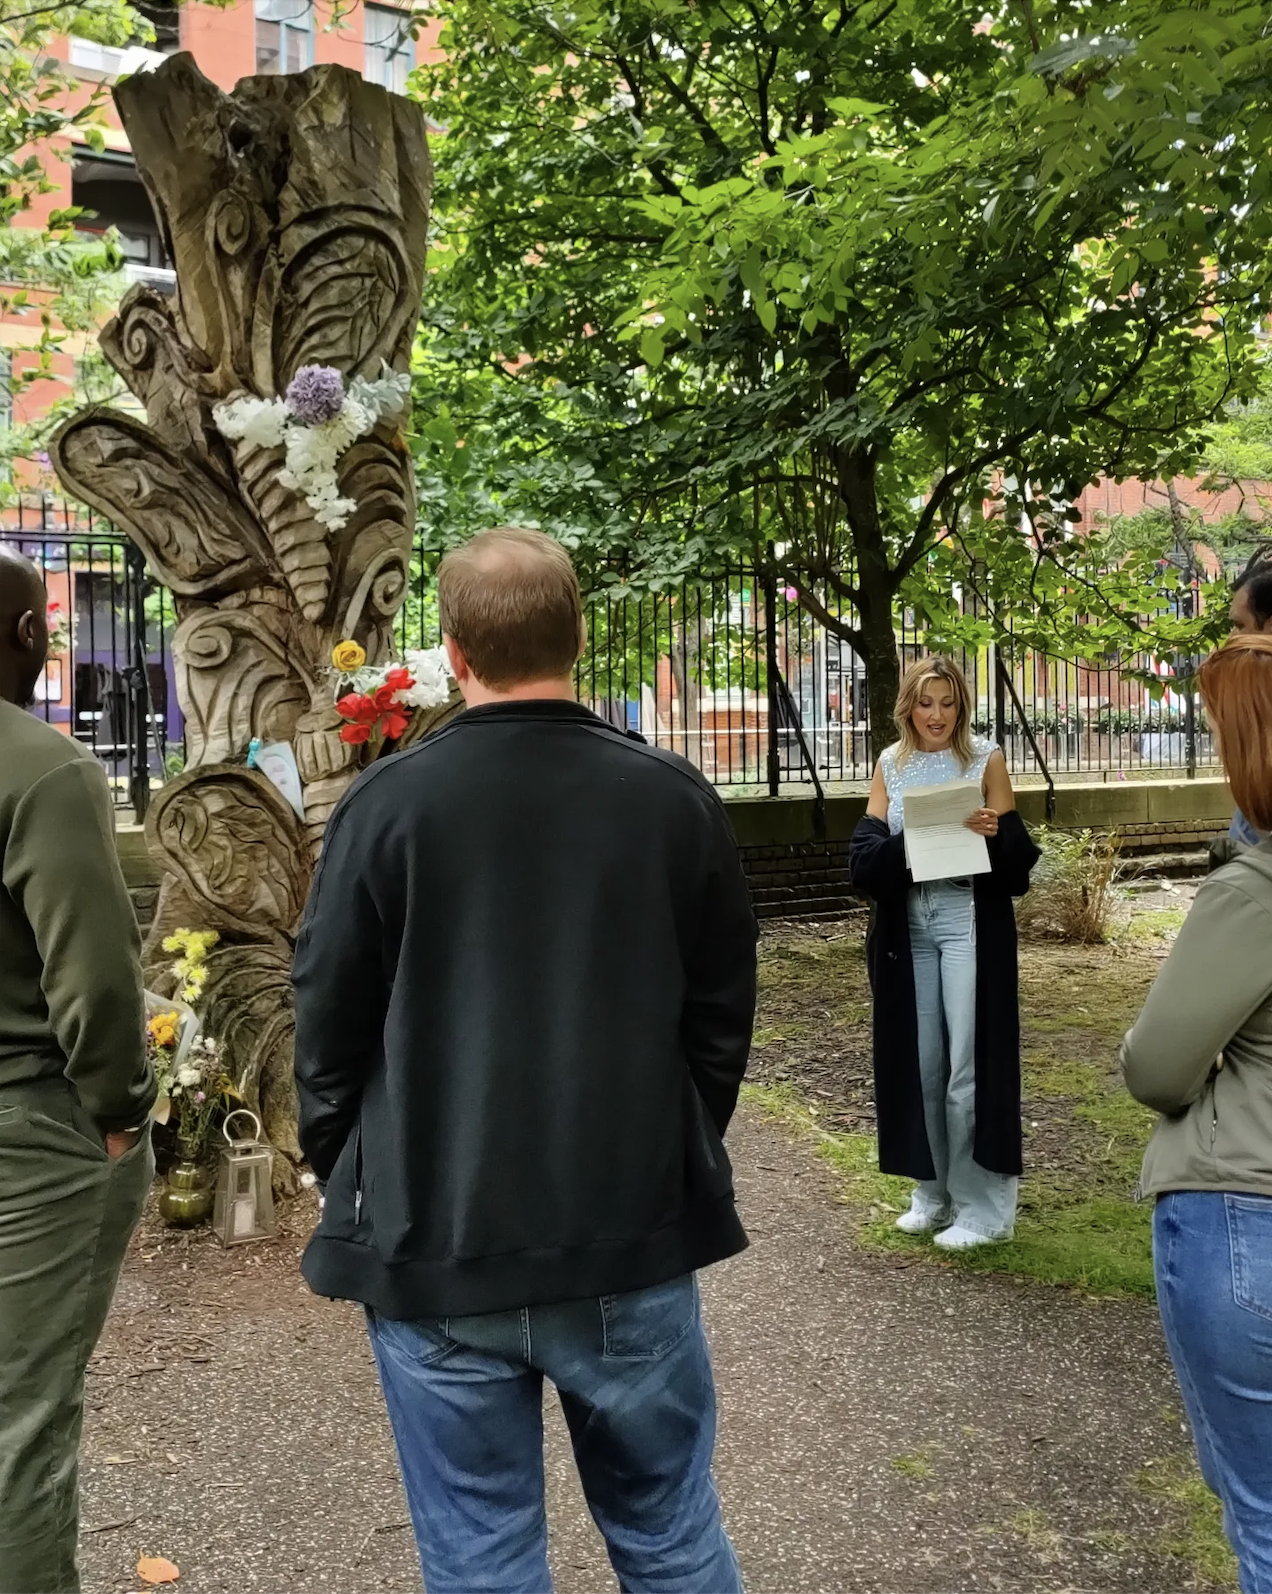 LGBTQ+ History Tour of Manchester hosted by Gill Fordham (she/her) from Thoughtworks